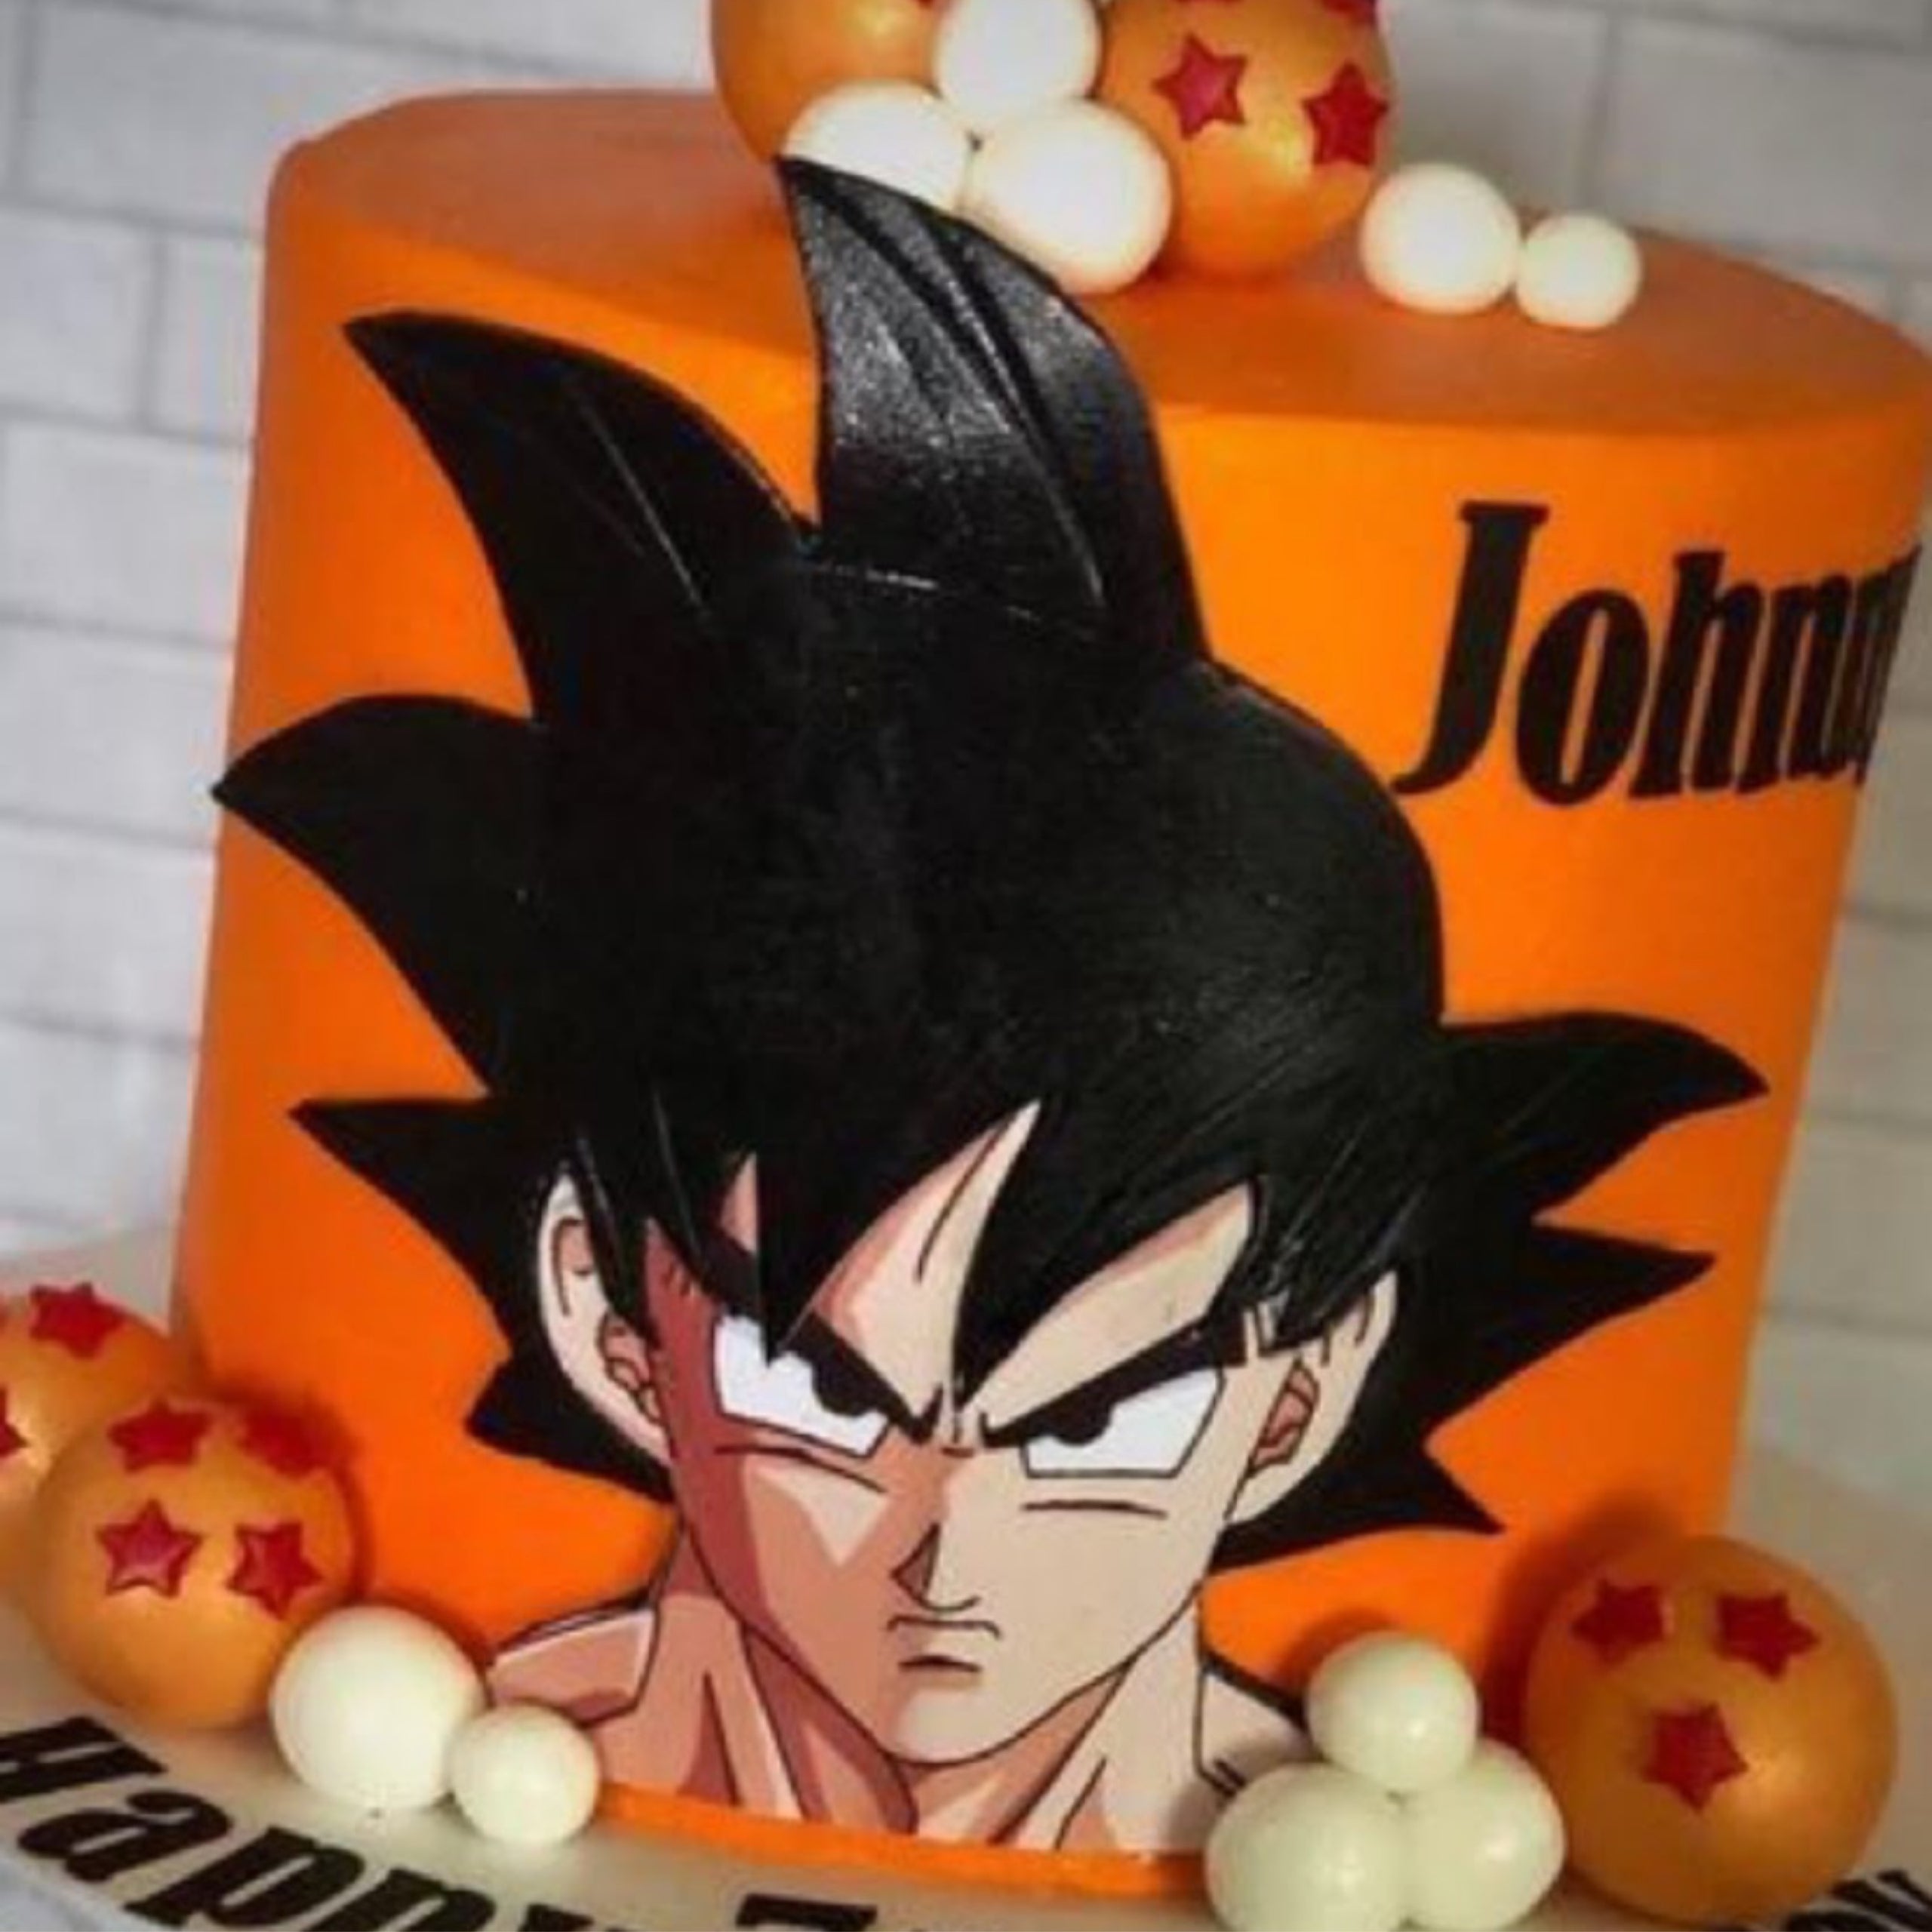 Dragonball Z Cake | The Sweetest Thing On Earth, LLC